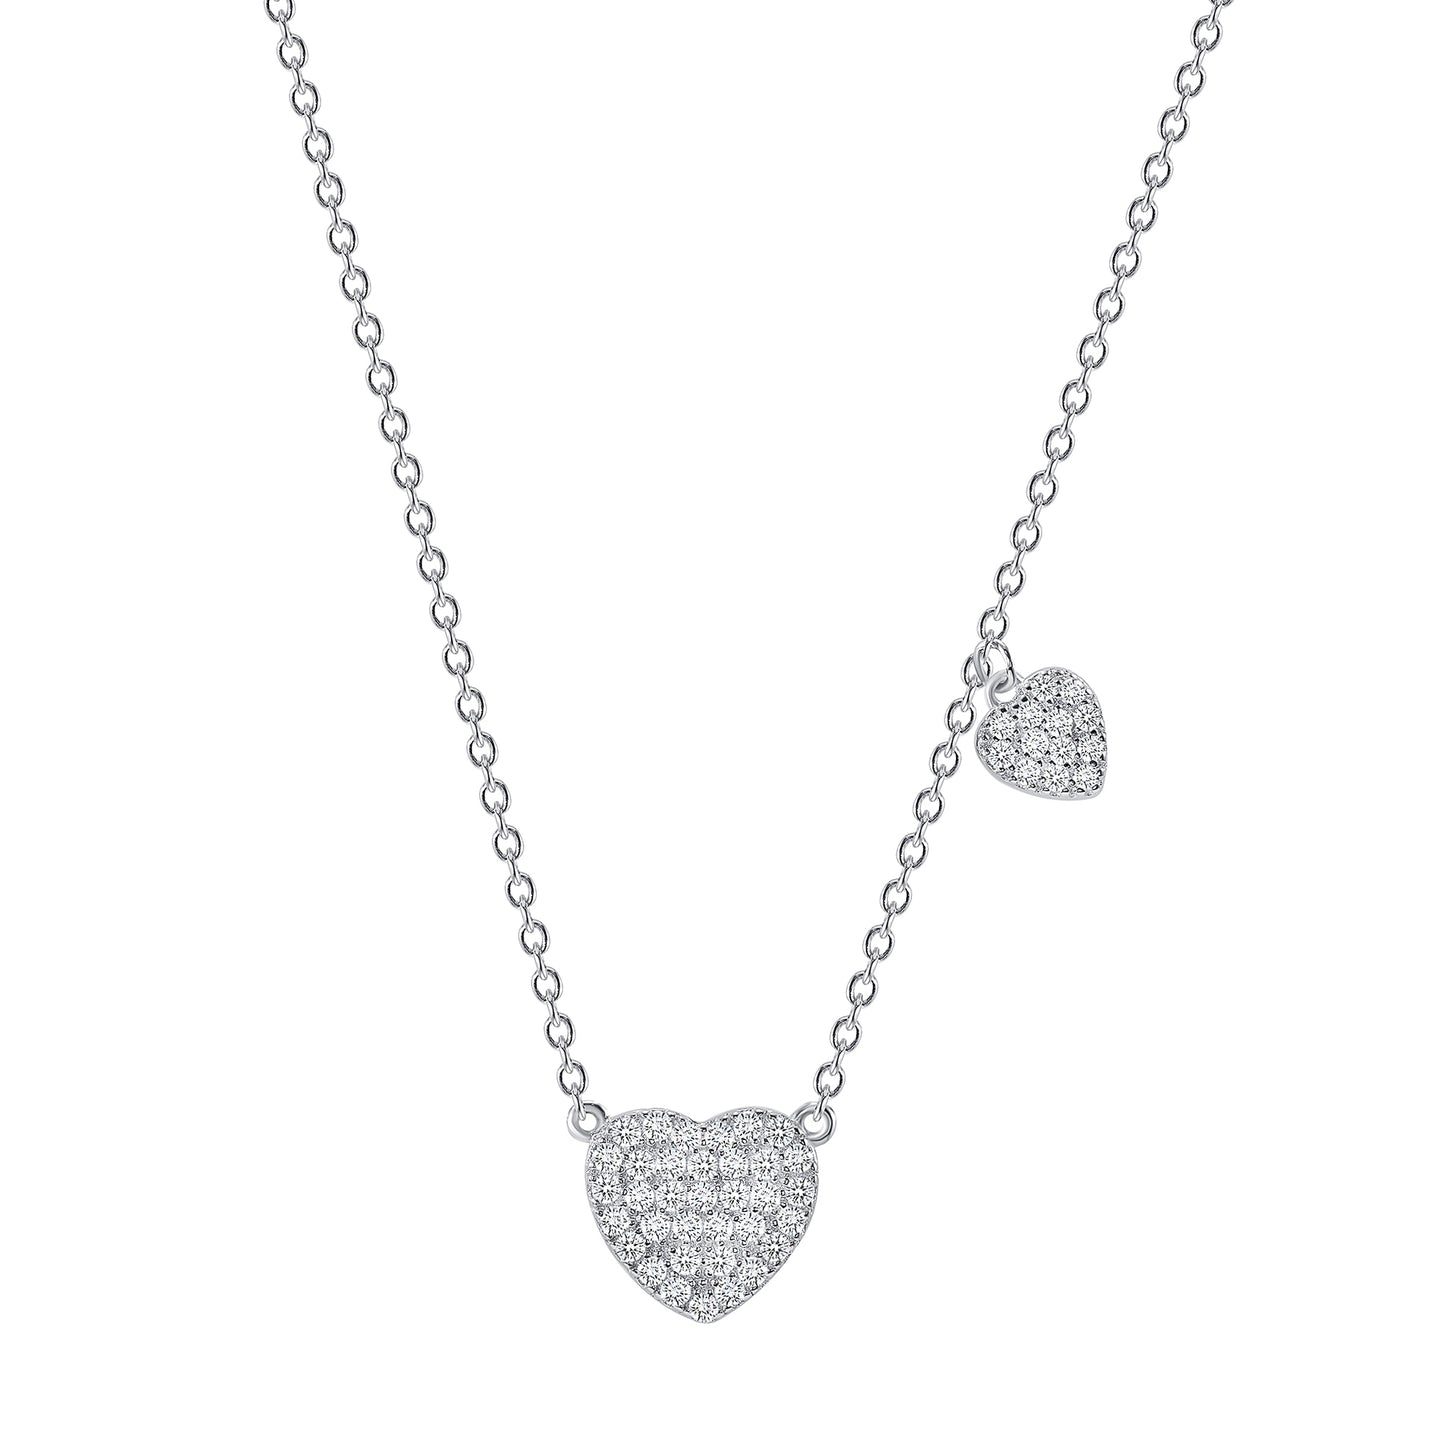 BN3262RHD. Silver 925 Rhodium Plated Cubic Zirconia Double Heart Necklace